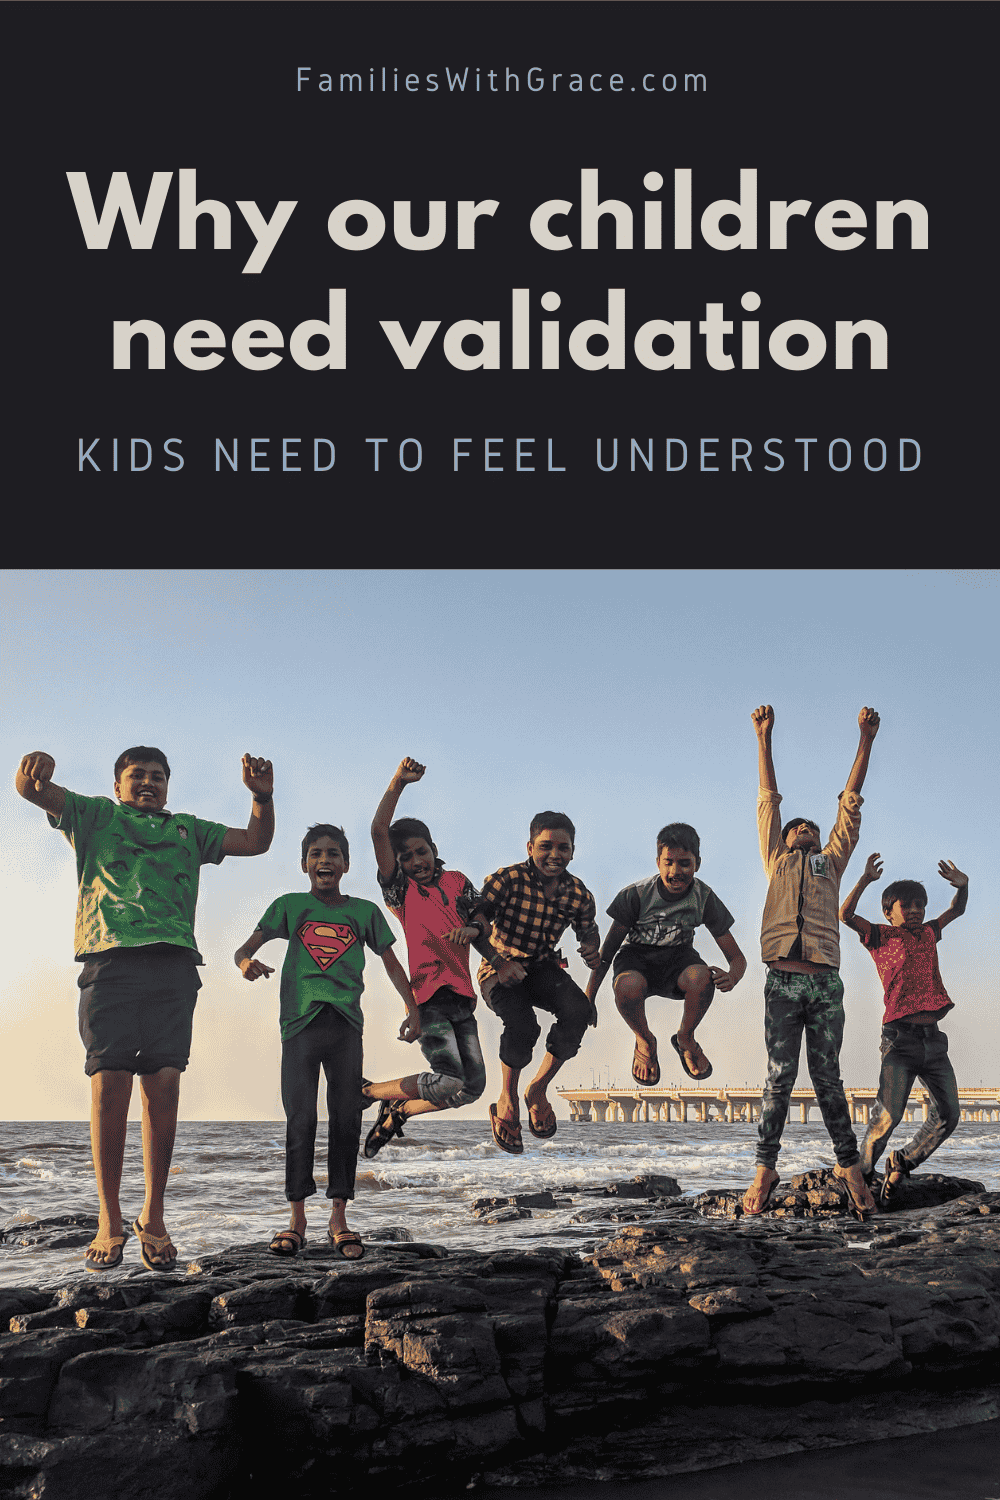 Why our children need validation